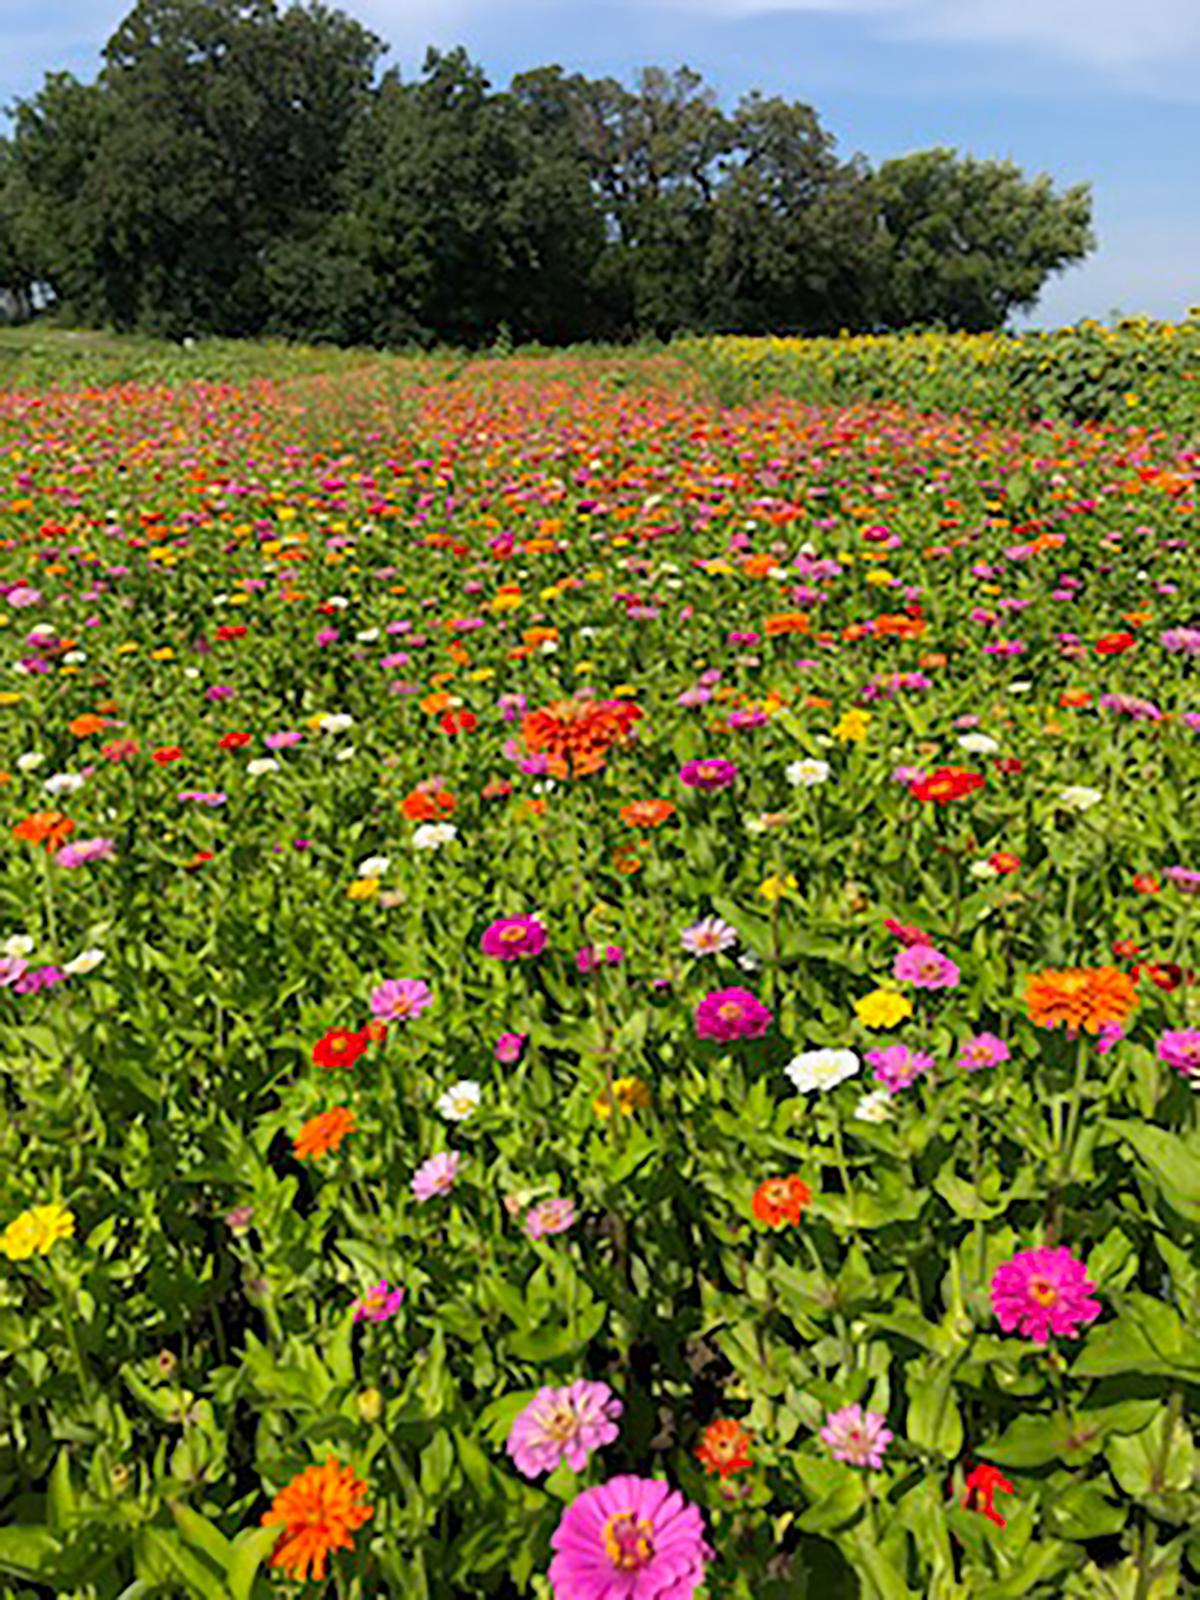 Scott Thompson also planted a field of zinnias, a field of wildflowers, and Mexican sunflowers. (Courtesy of Scott Thompson)